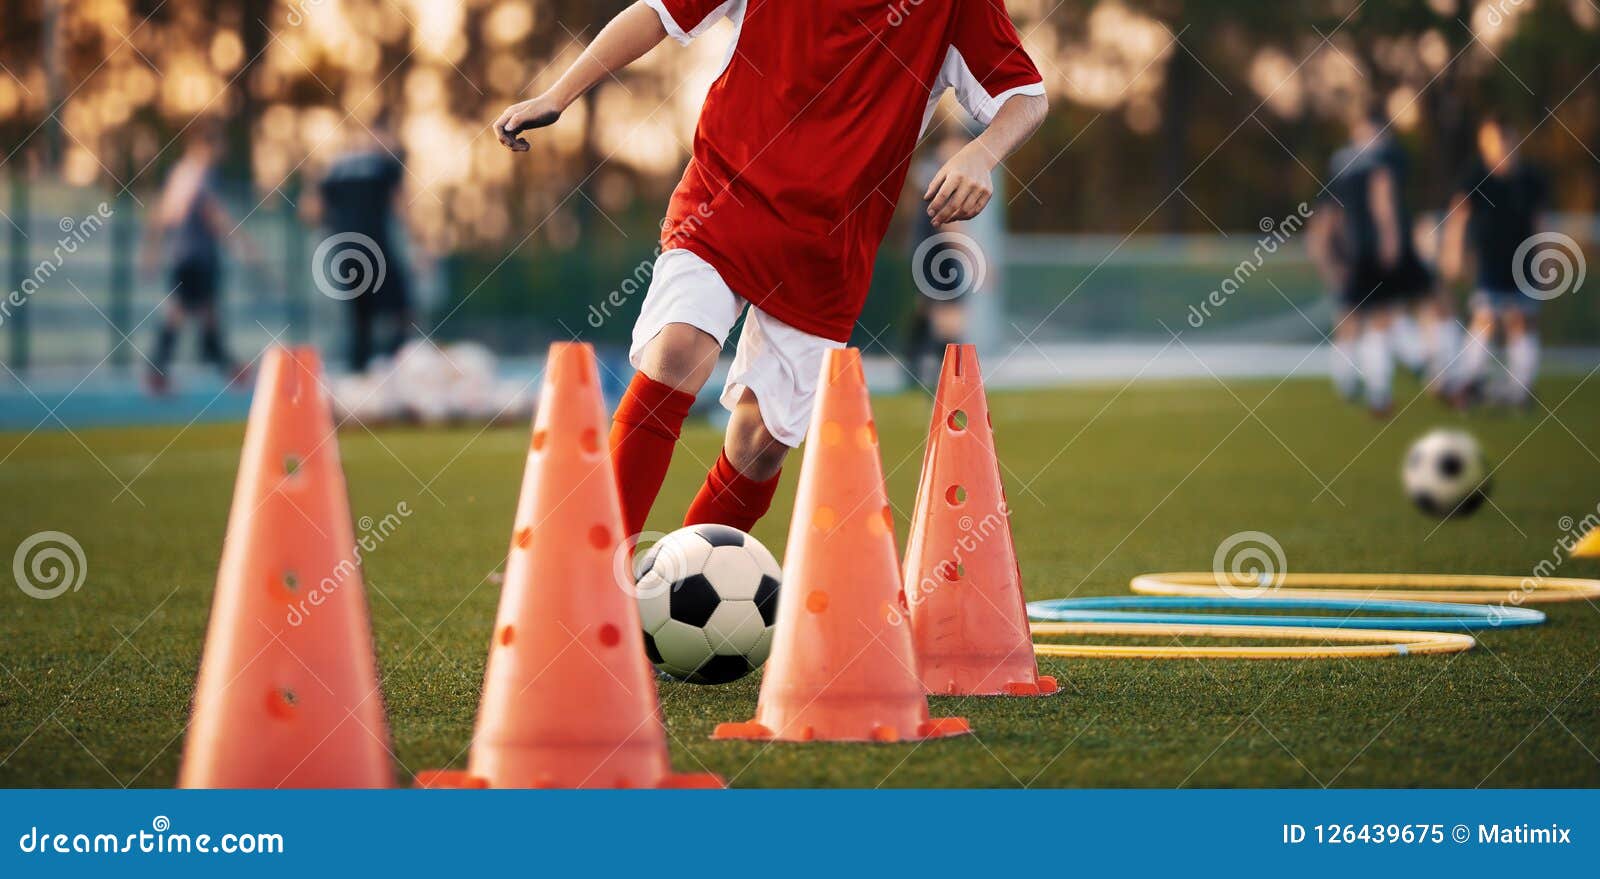 soccer drills: the slalom drill. youth soccer practice drills